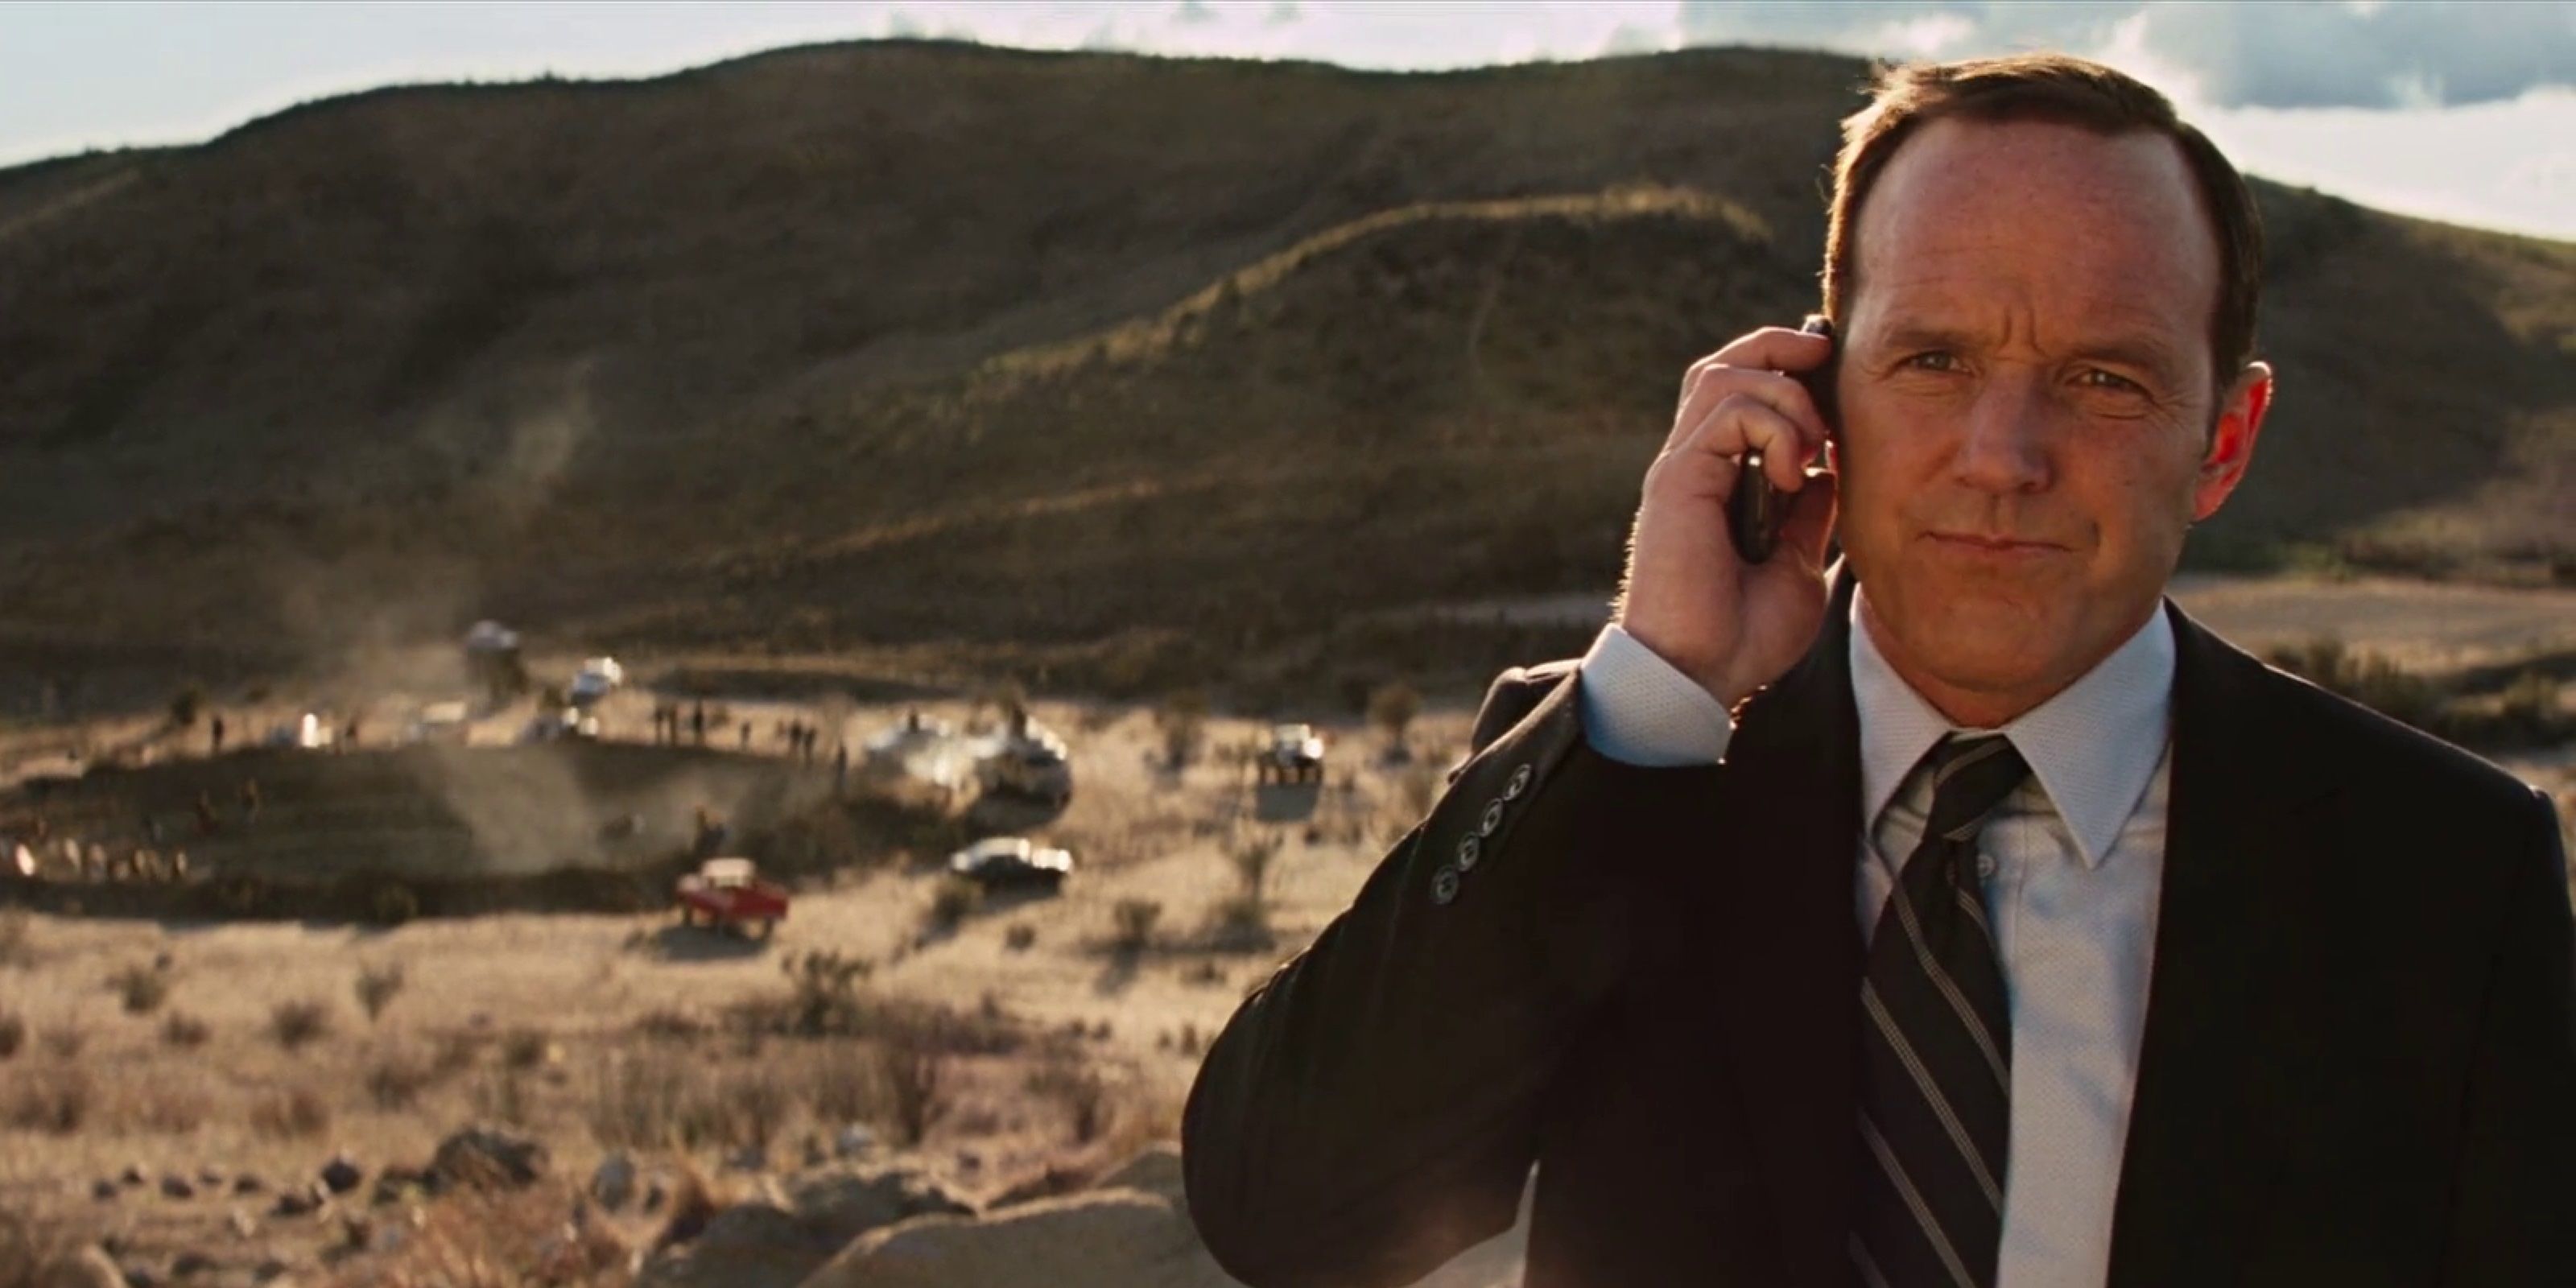 Agent Coulson finds Thor's hammer in Iron Man 2 movie.